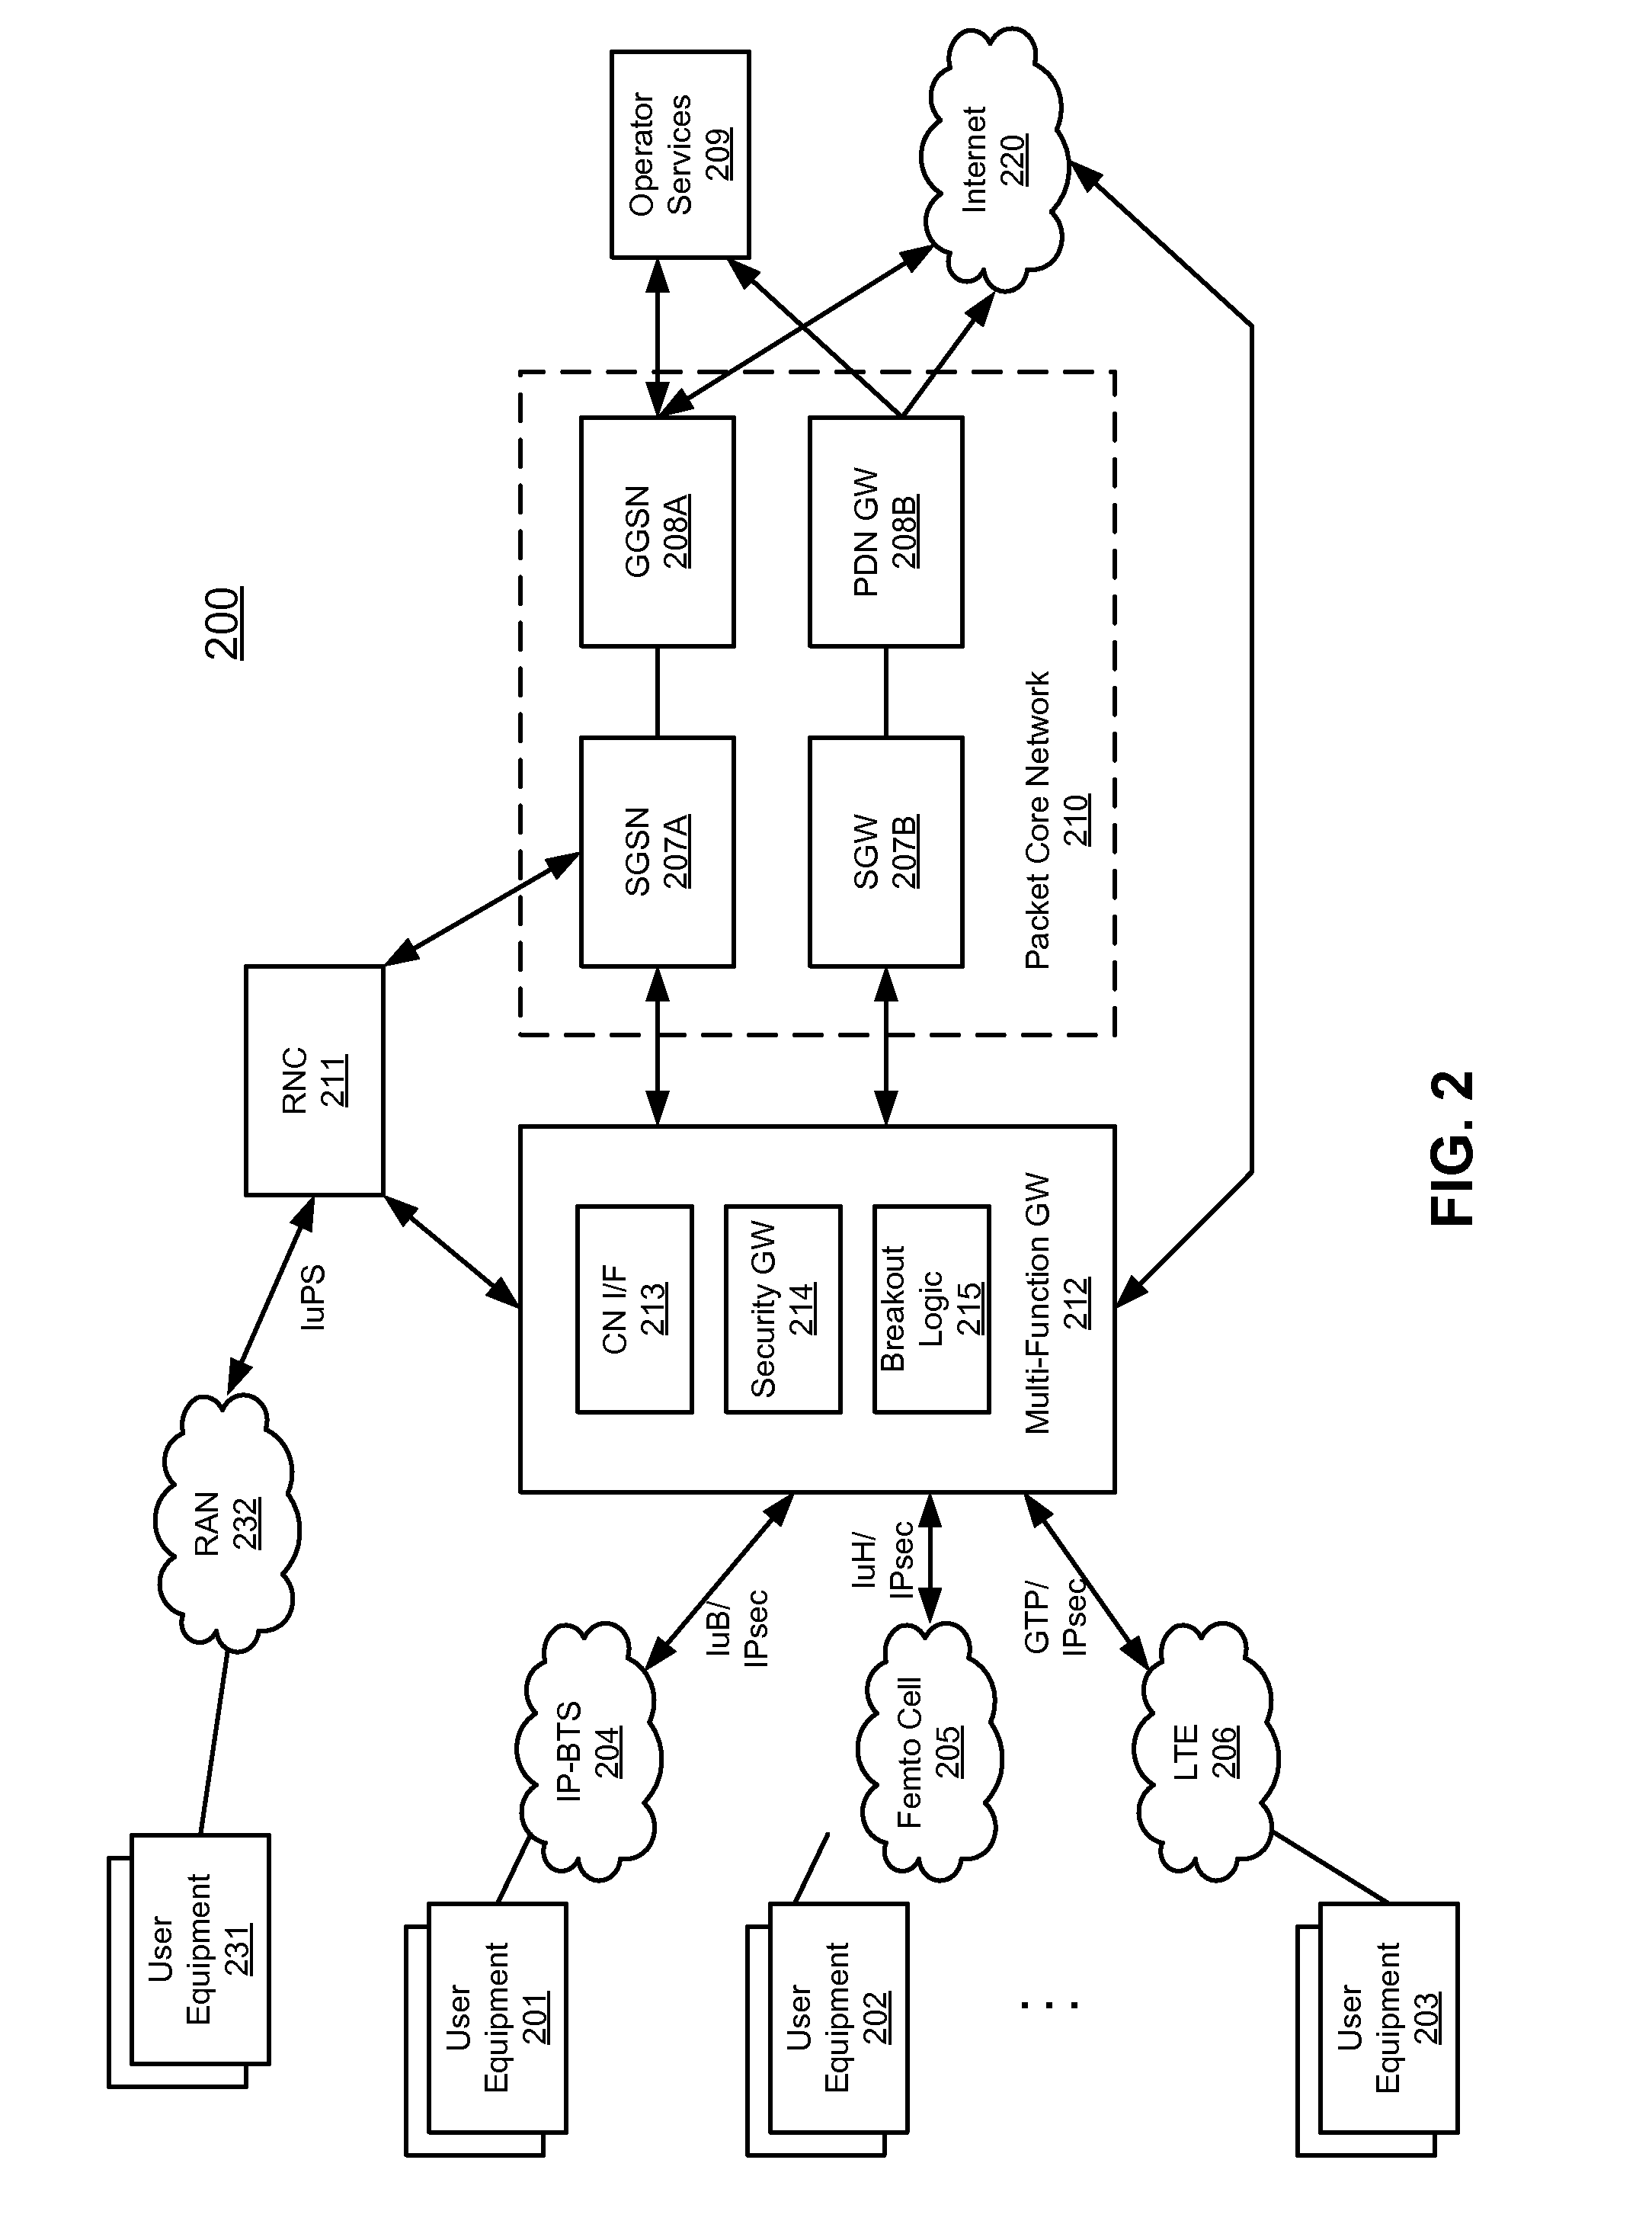 Method and system for bypassing 3gpp packet switched core network when accessing internet from 3gpp ues using ip-bts, femto cell, or LTE access network